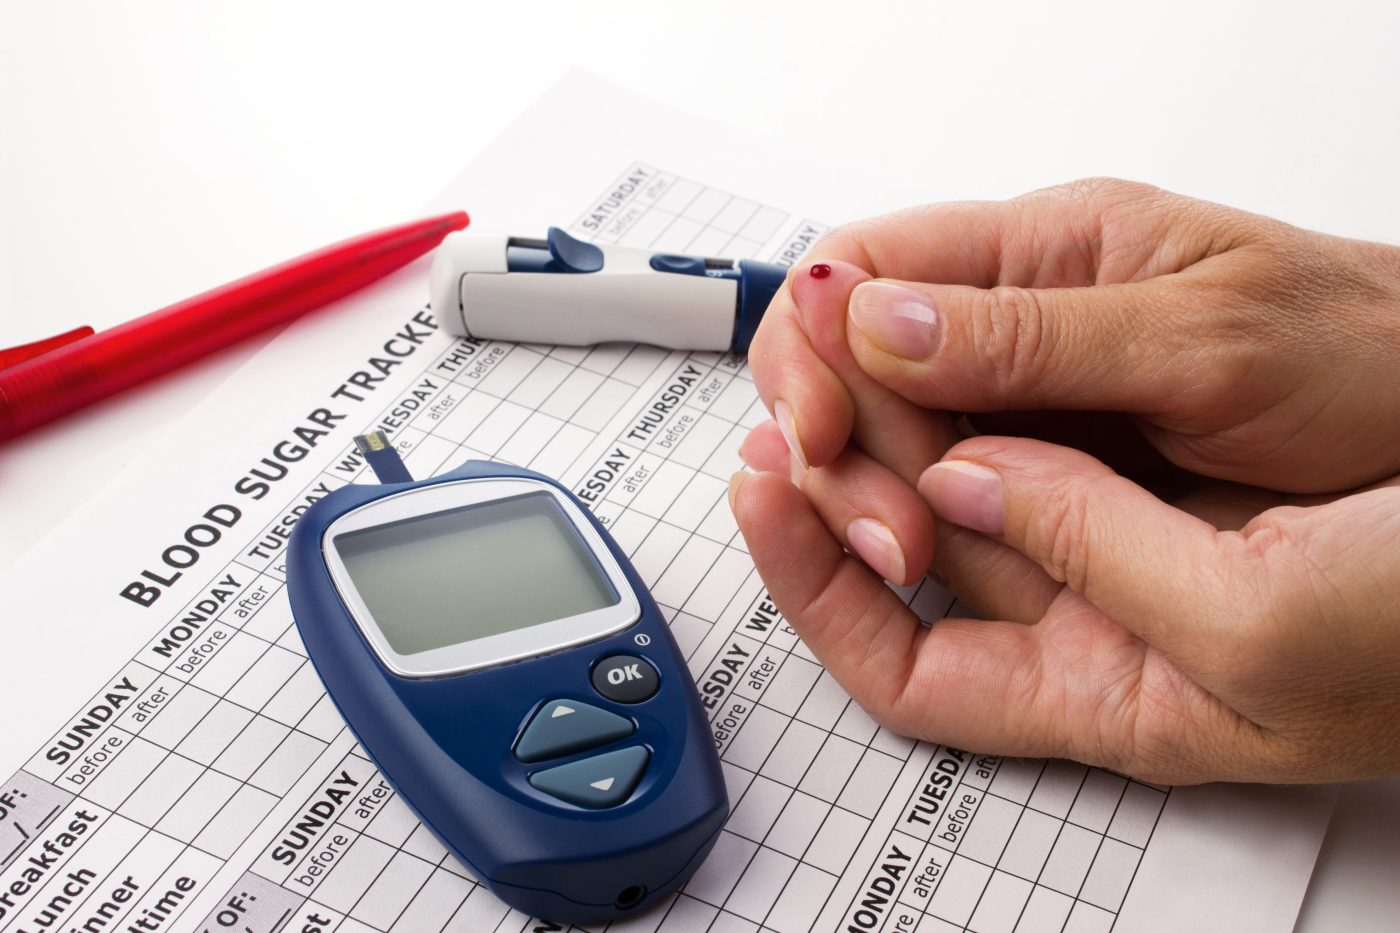 Trends in Diabetes Diagnosis Indicate an Increased Prevalence Between 1988 and 2012